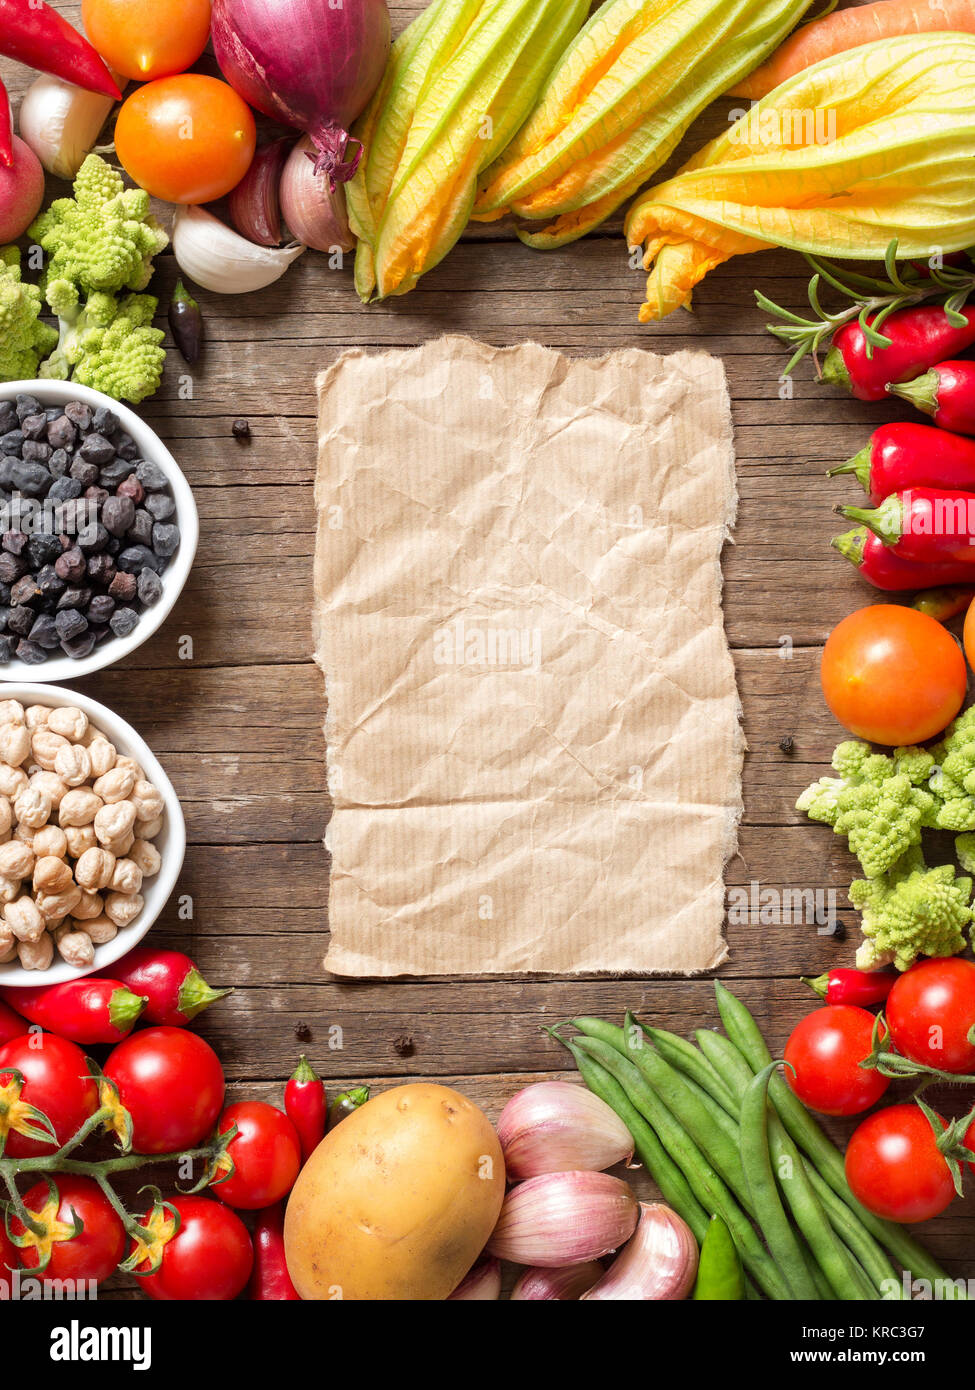 Vegetables, paper and chickpea on a wooden table Stock Photo